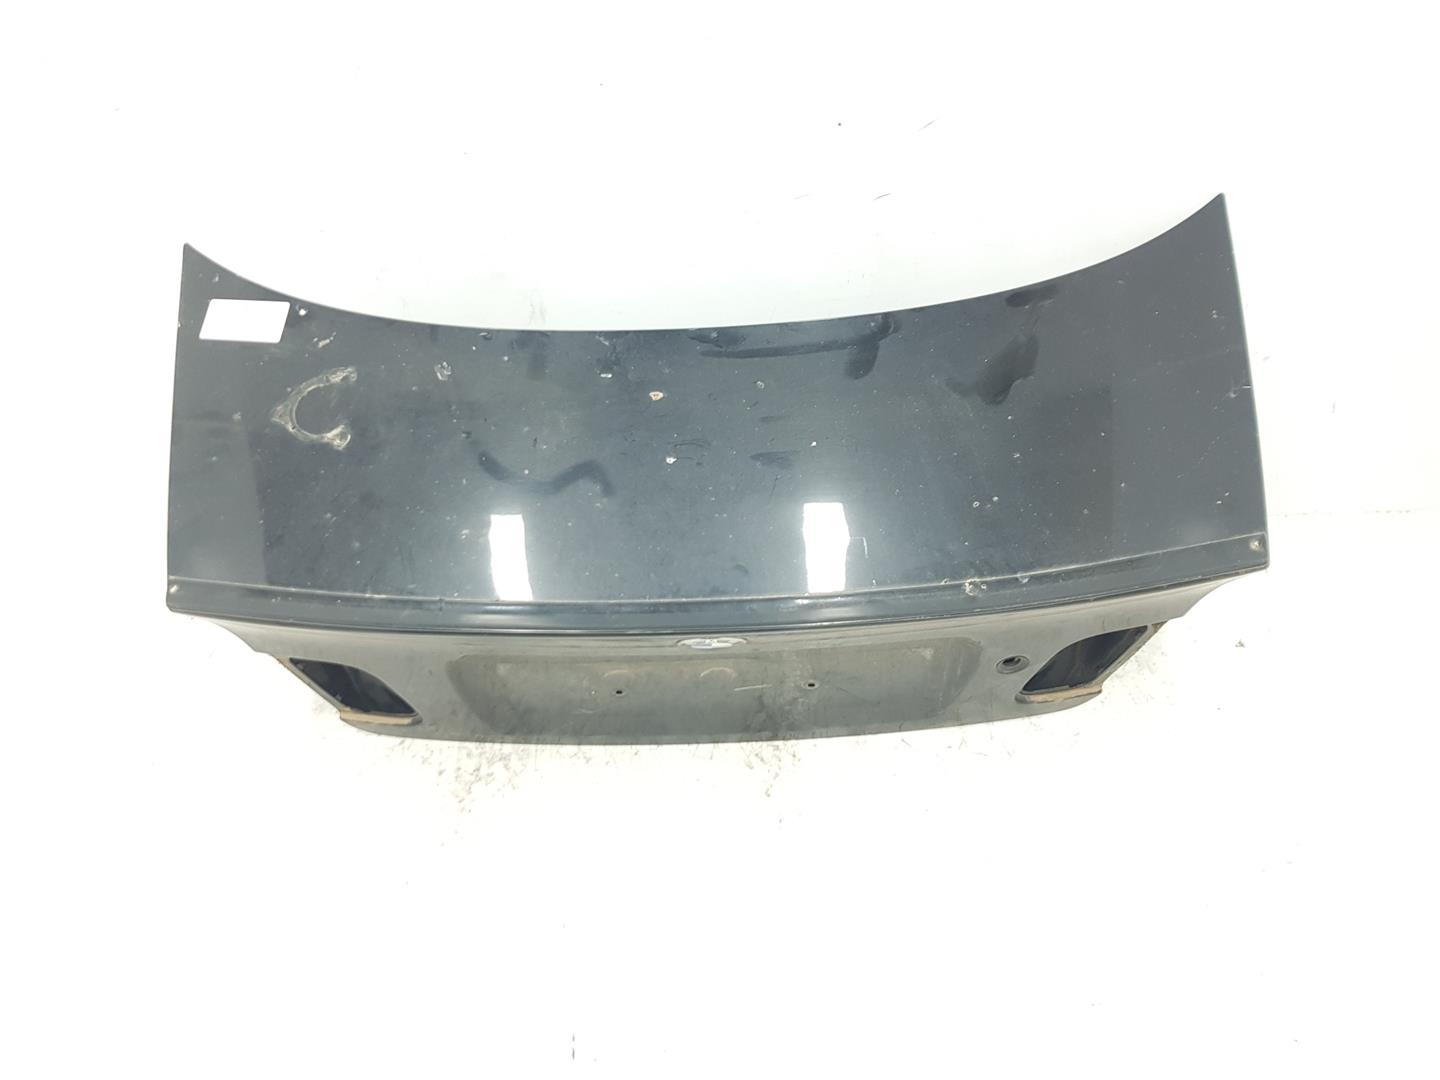 BMW 3 Series E46 (1997-2006) Bootlid Rear Boot 41627003314, 41627003314 19829100